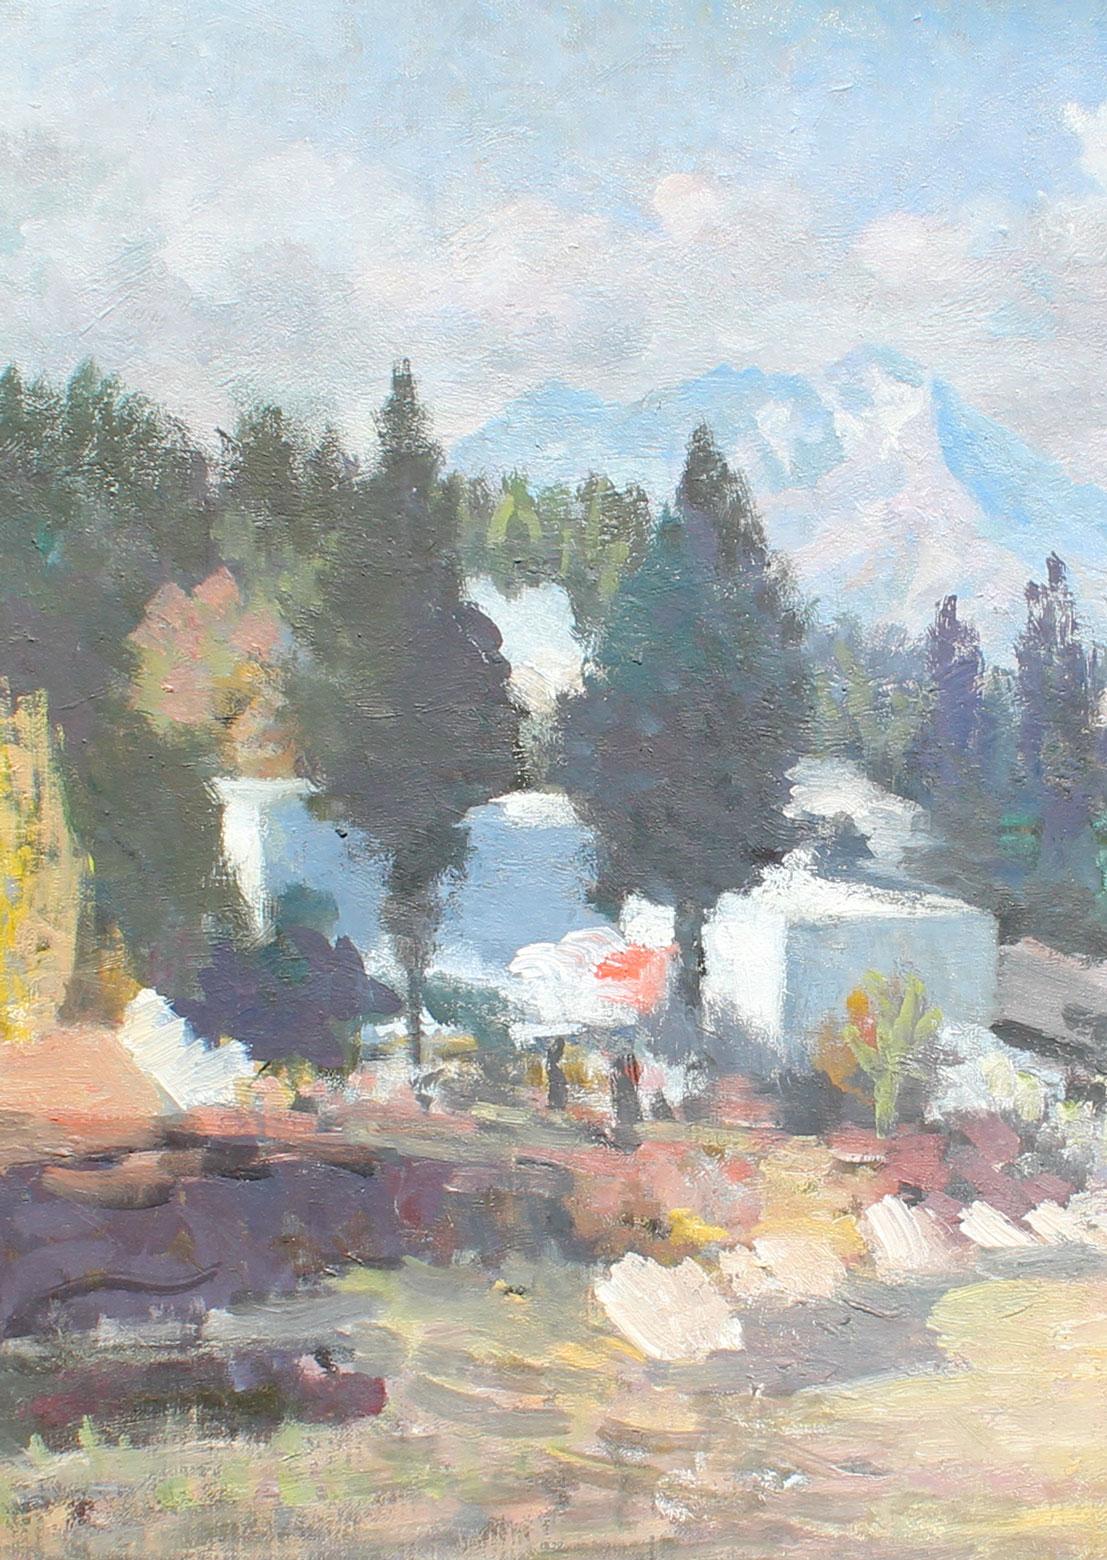 Village of Pyrenees - Gray Landscape Painting by Francois Baboulet